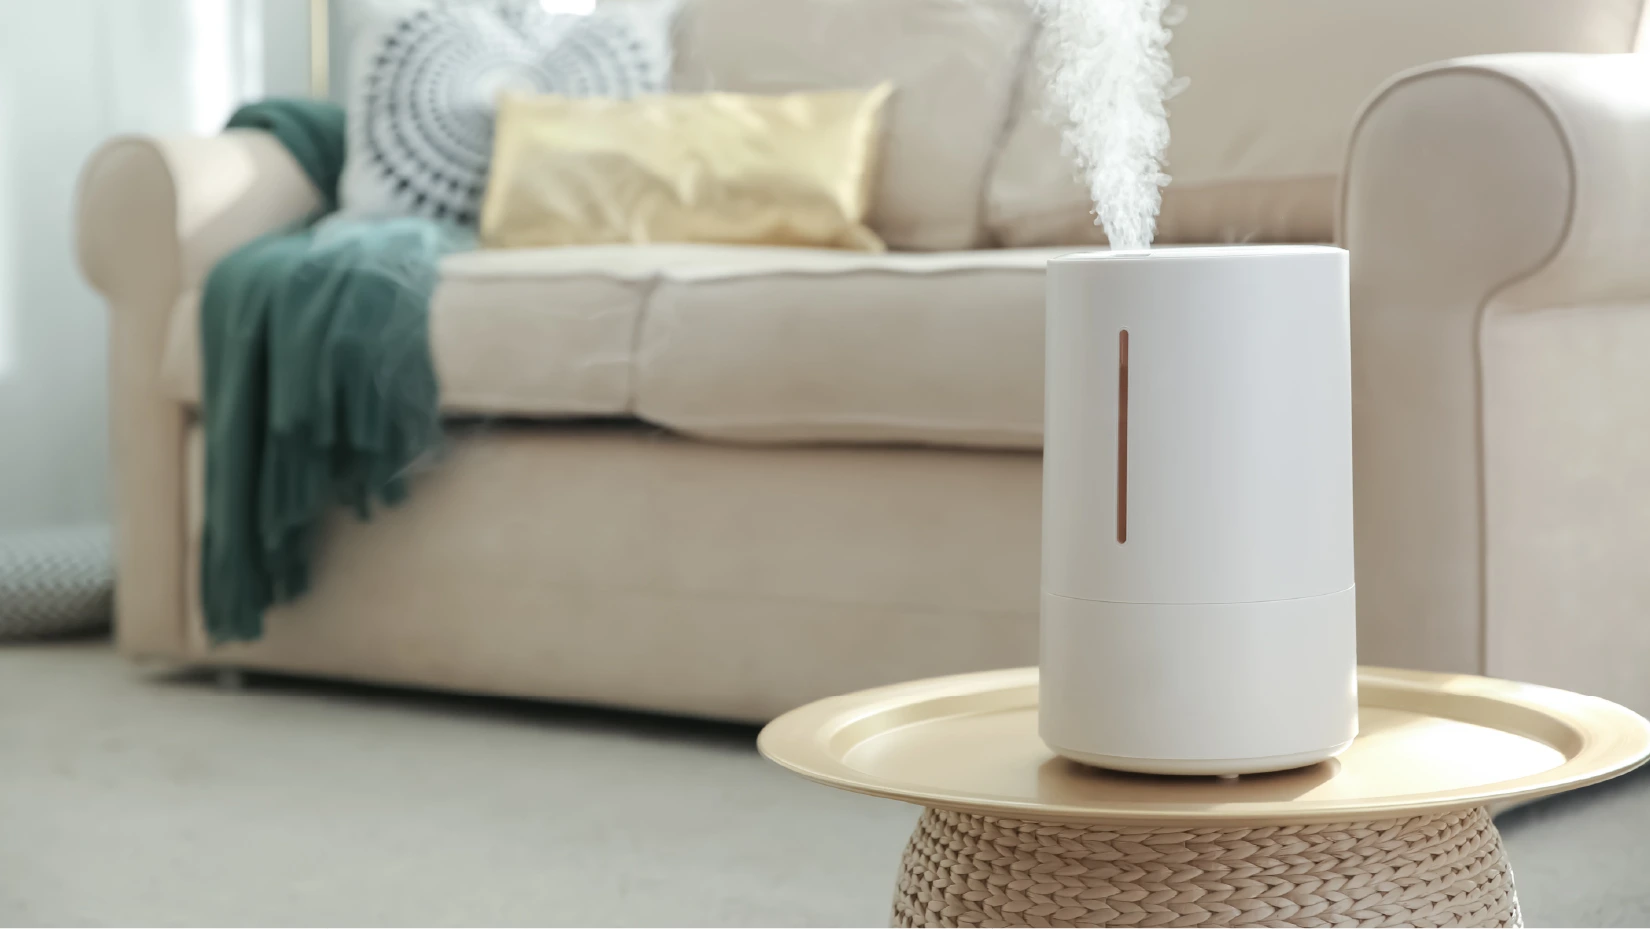 A white humidifier sits on a coffee table in a living room.